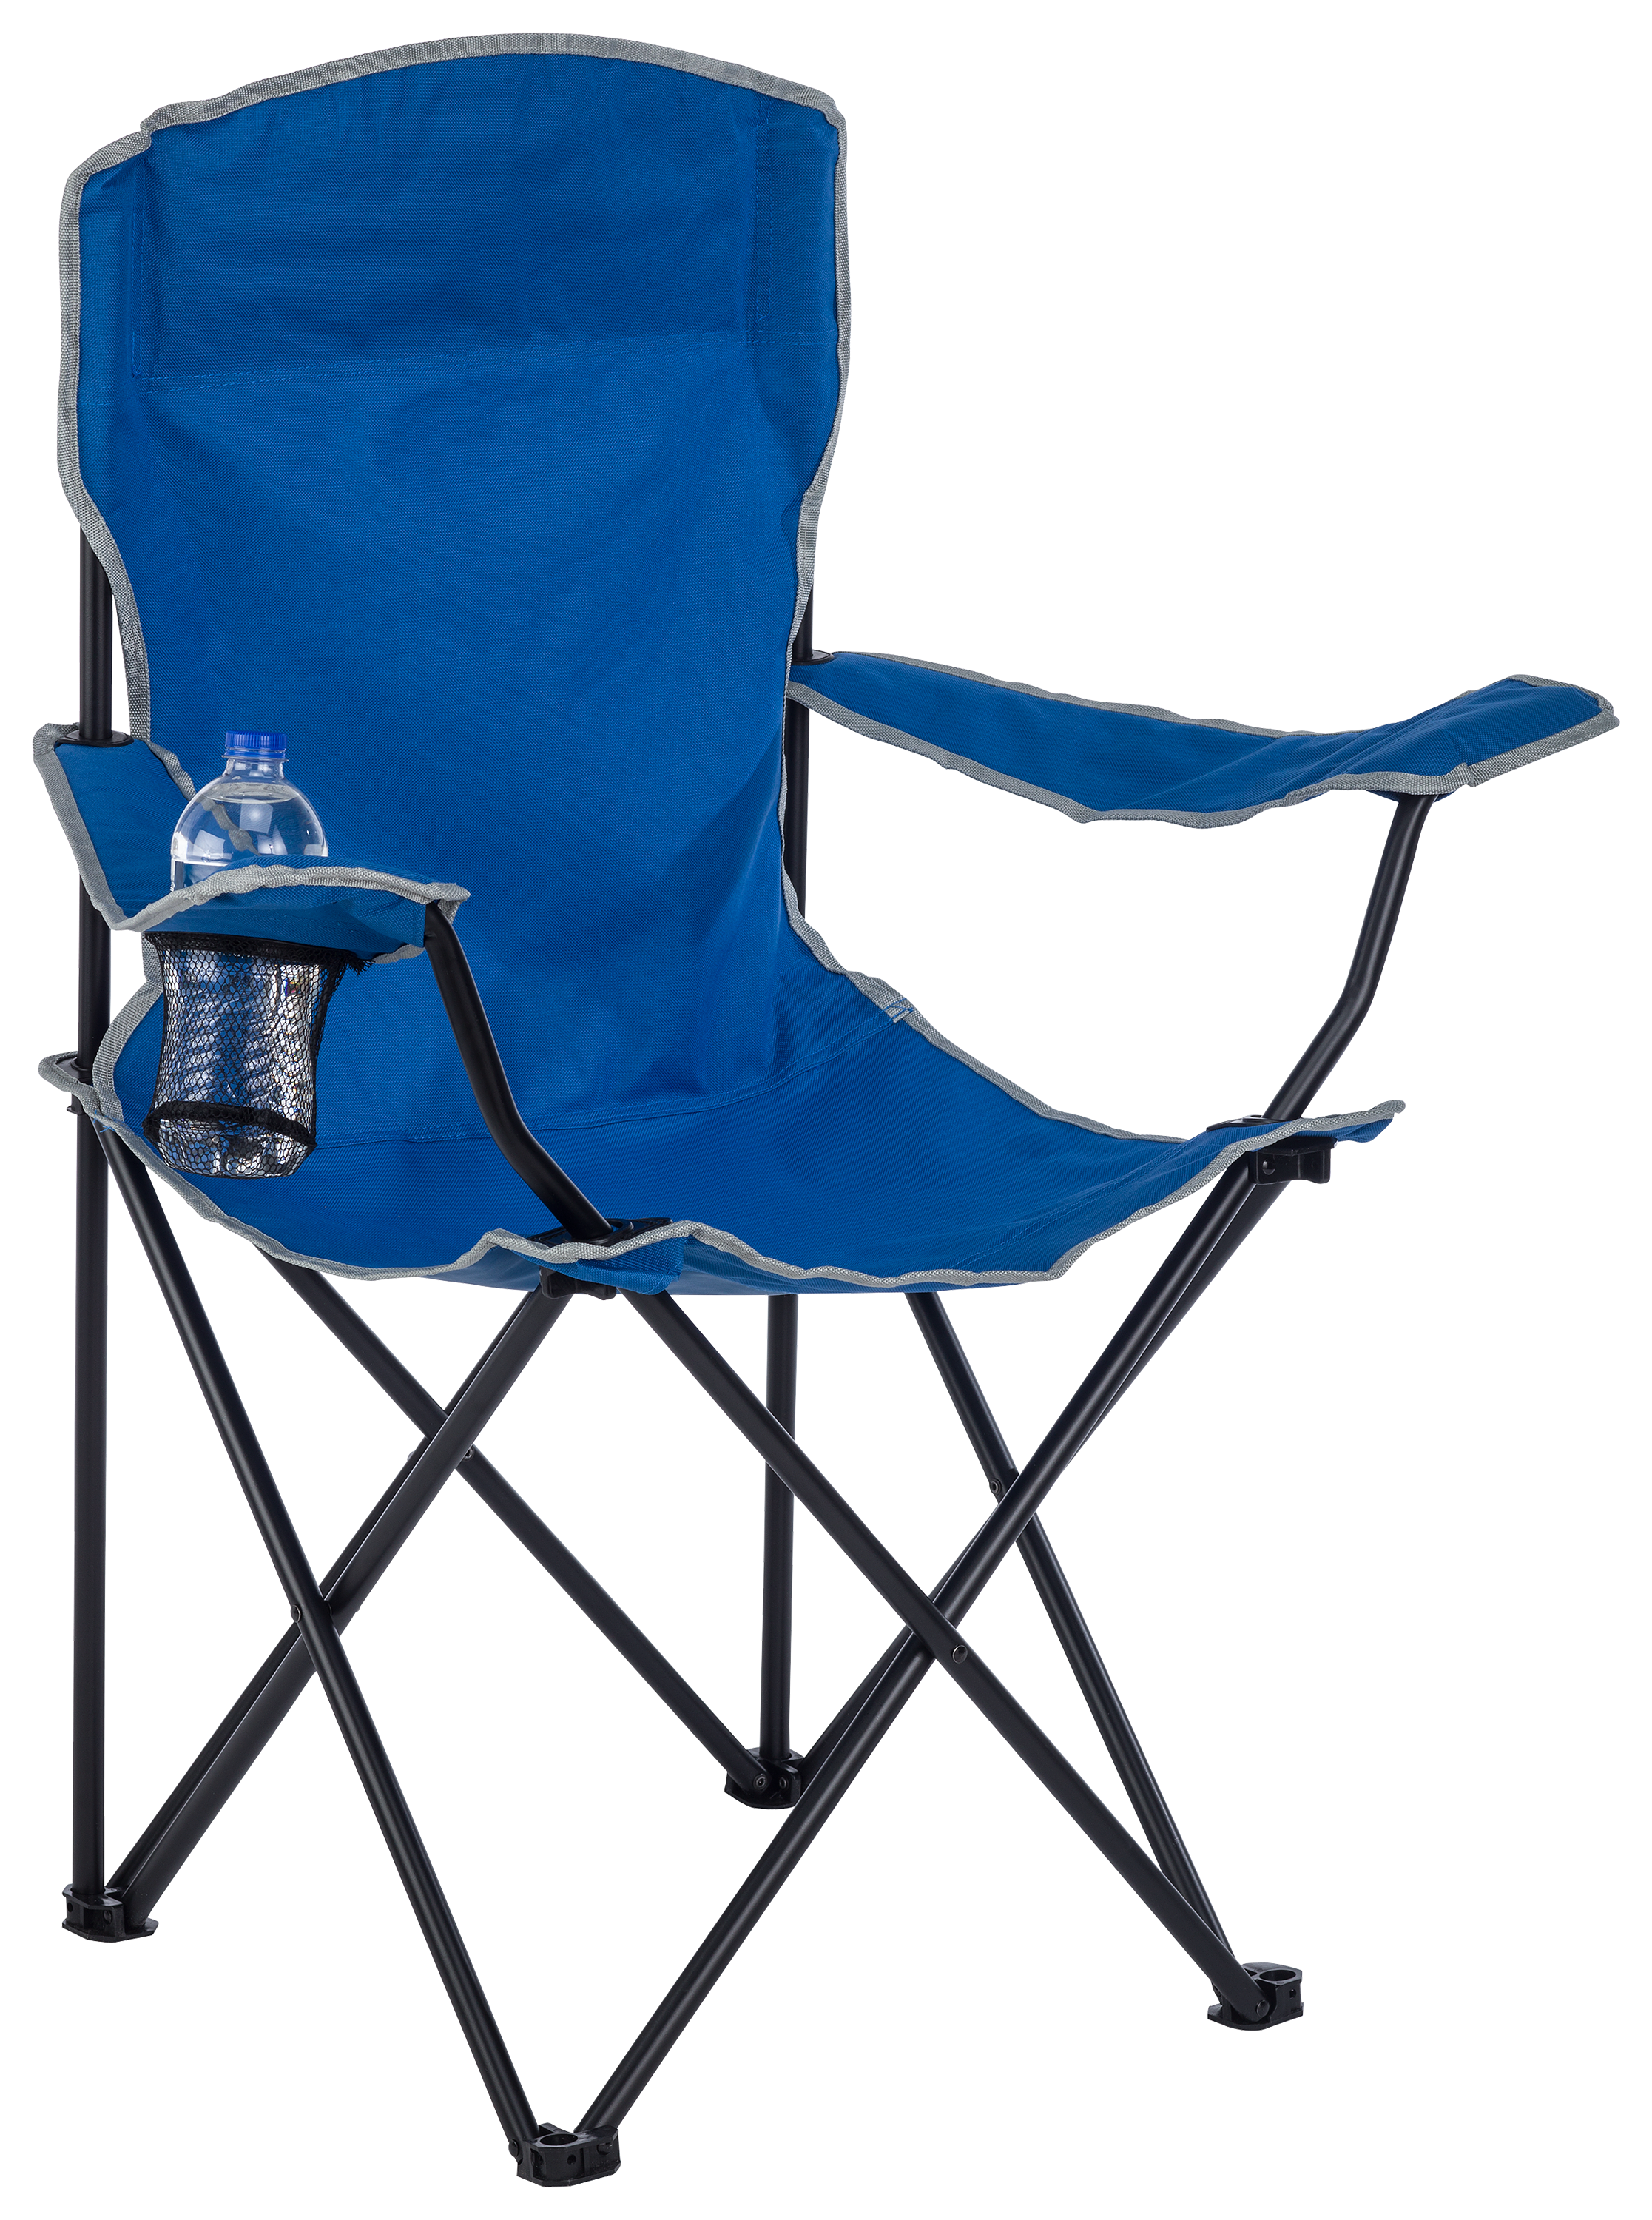 Foldable Camp Chair, Canadian Tire Camping Chair Sale